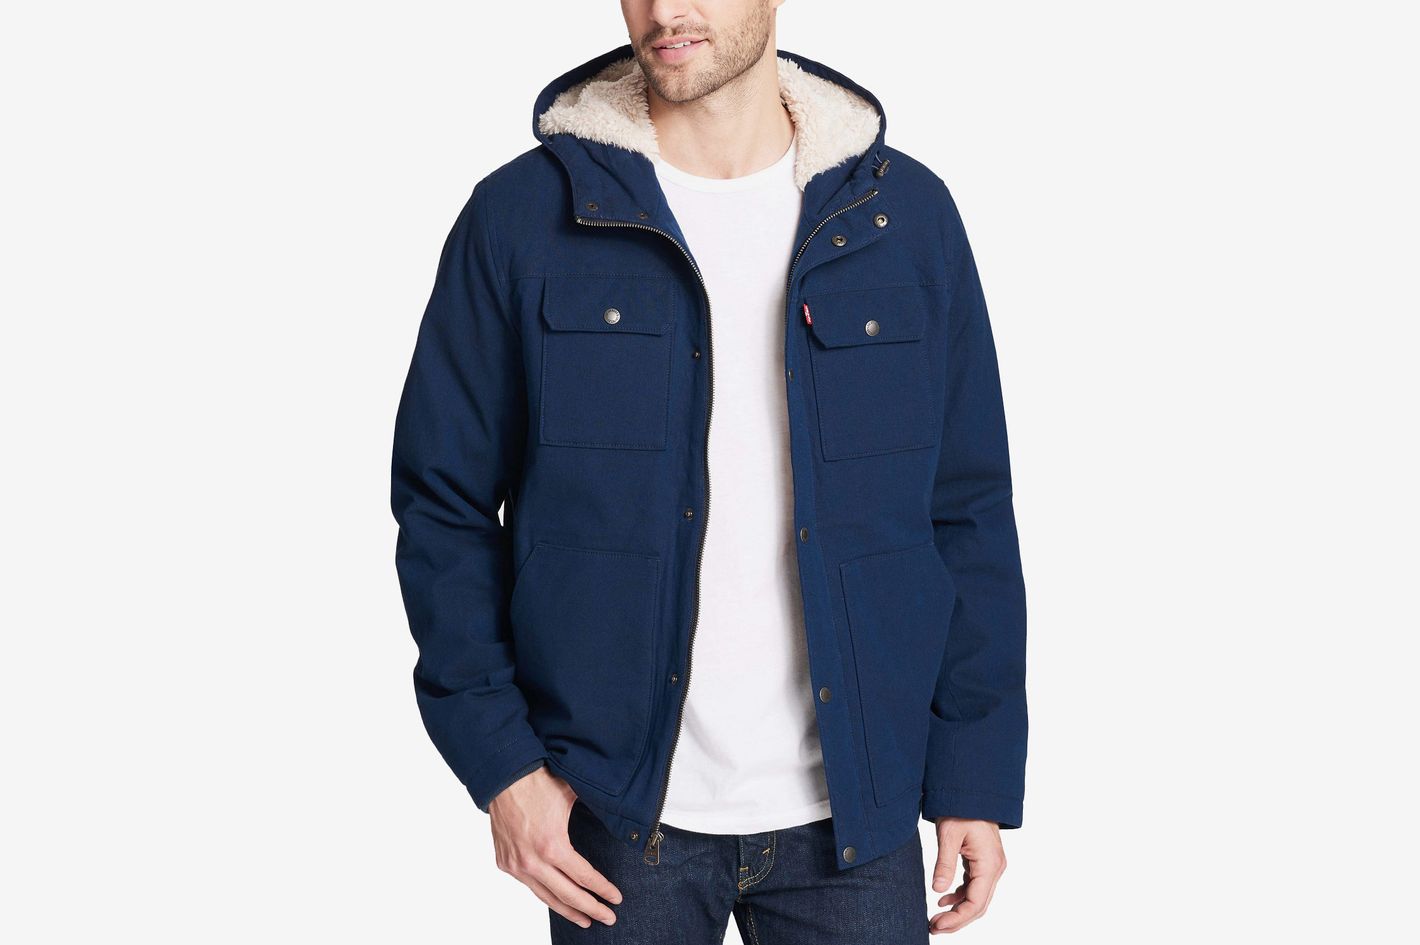 Levi's Jackets with Fleece Lining on Sale at Macy's: 2019 | The Strategist